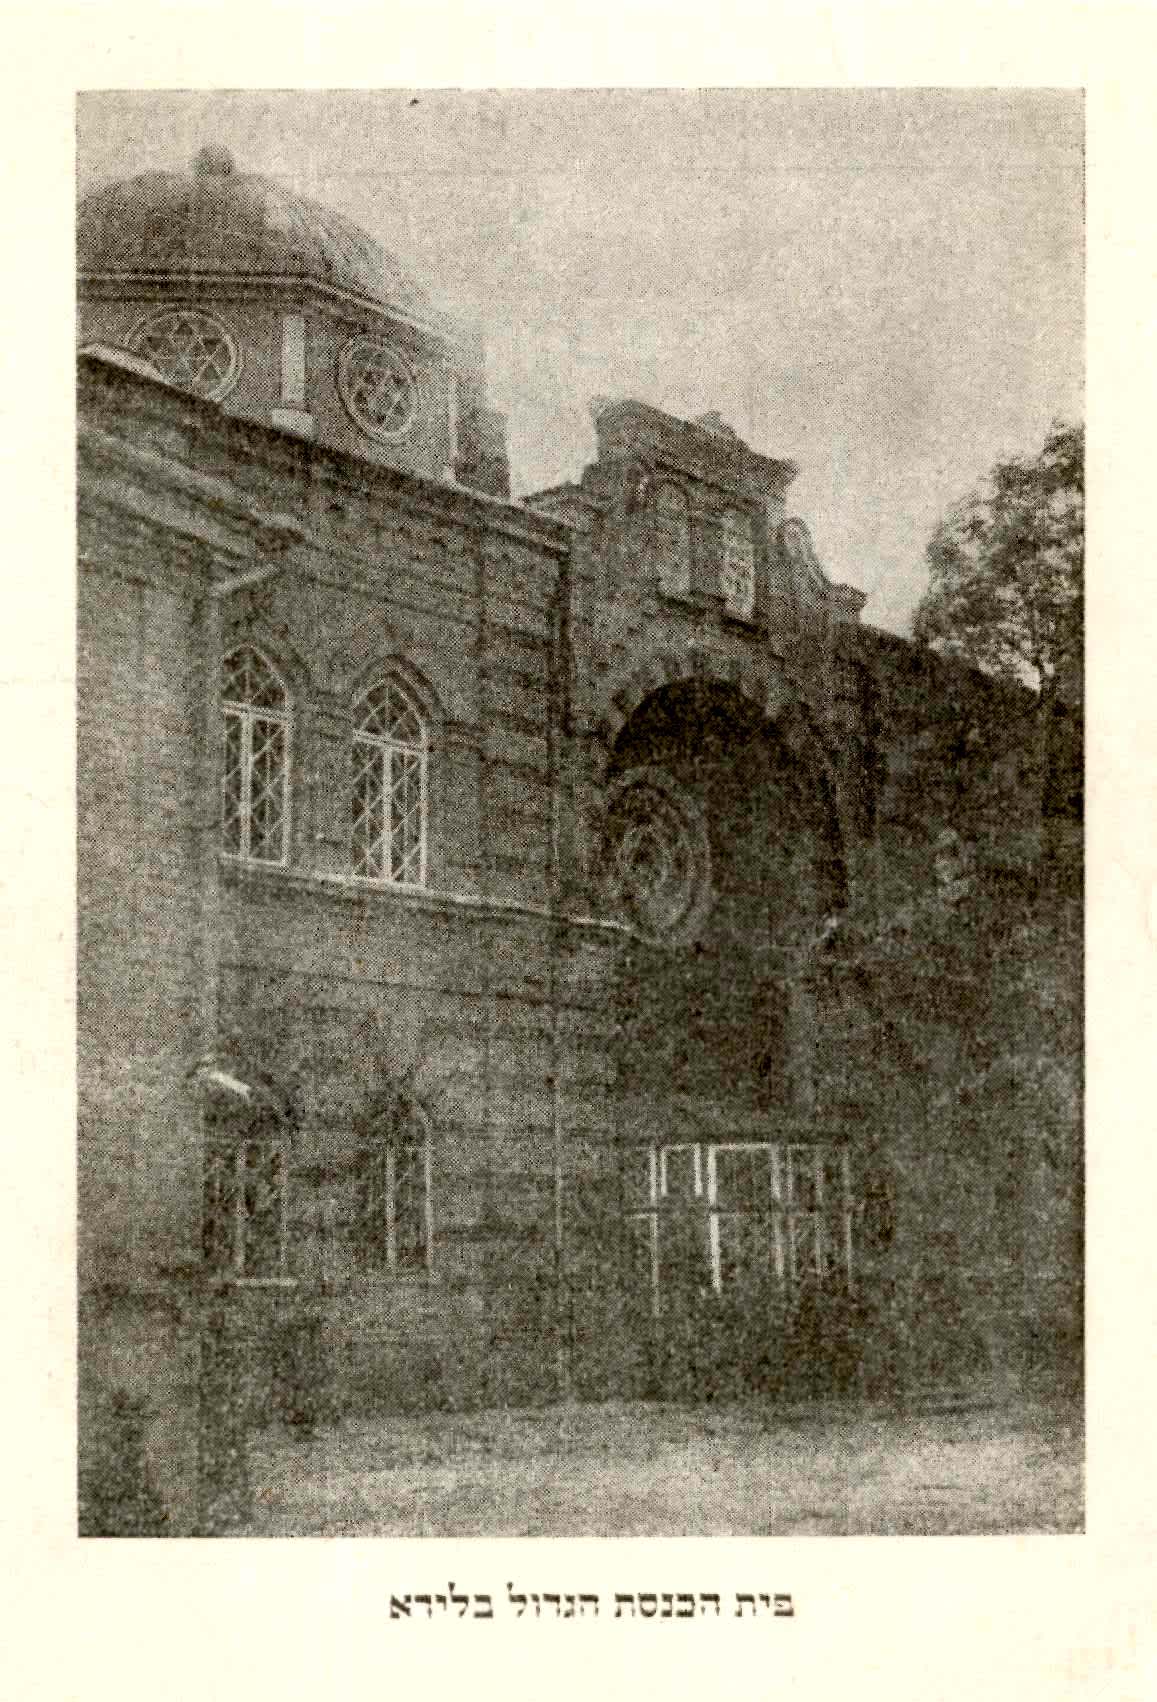 The Lida Synagogue, destroyed by the Nazis